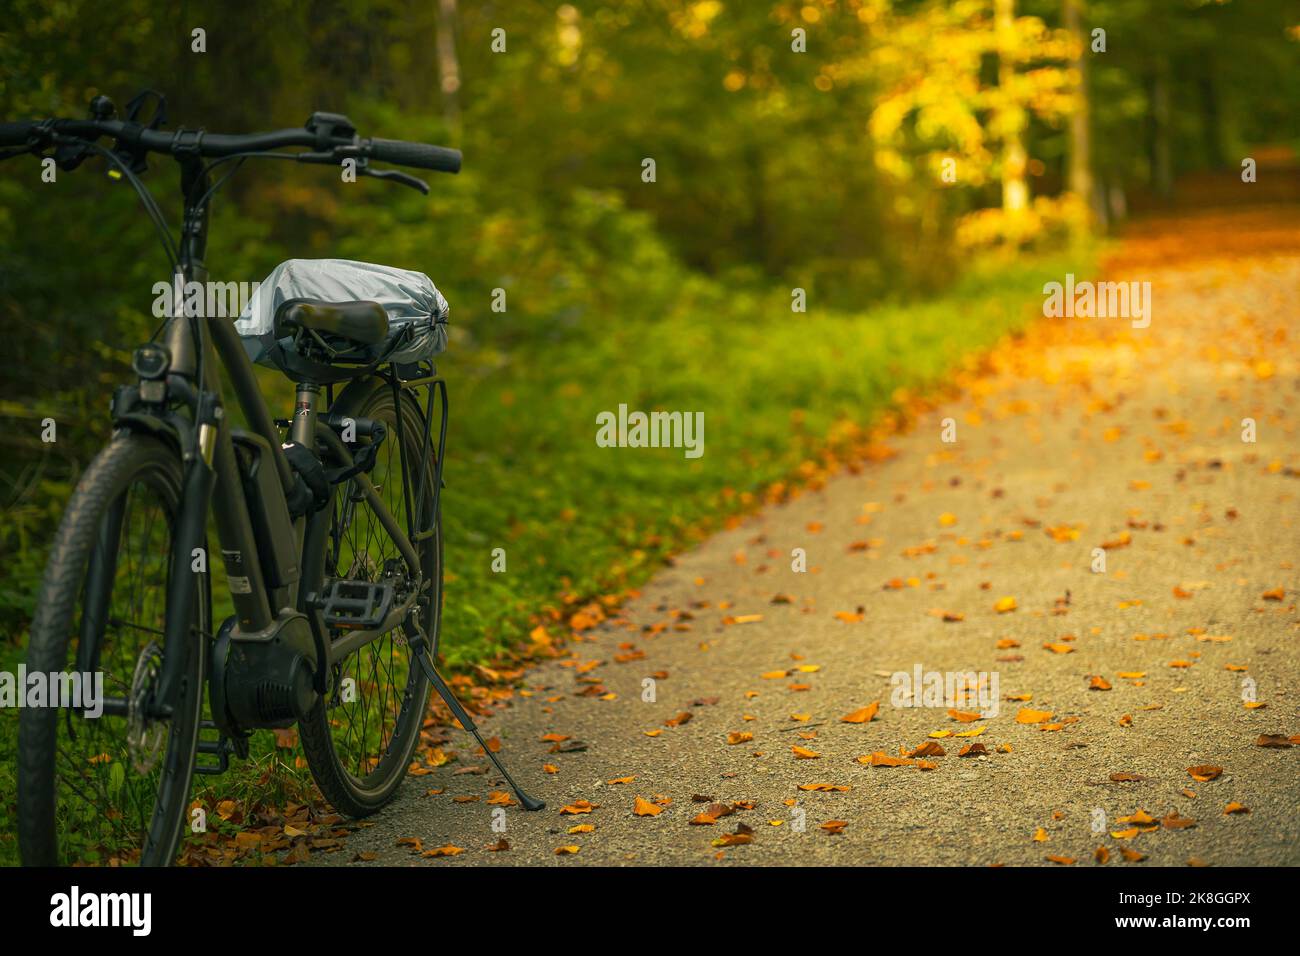 Bicycle ride in autumn forest in sunny warm day Stock Photo